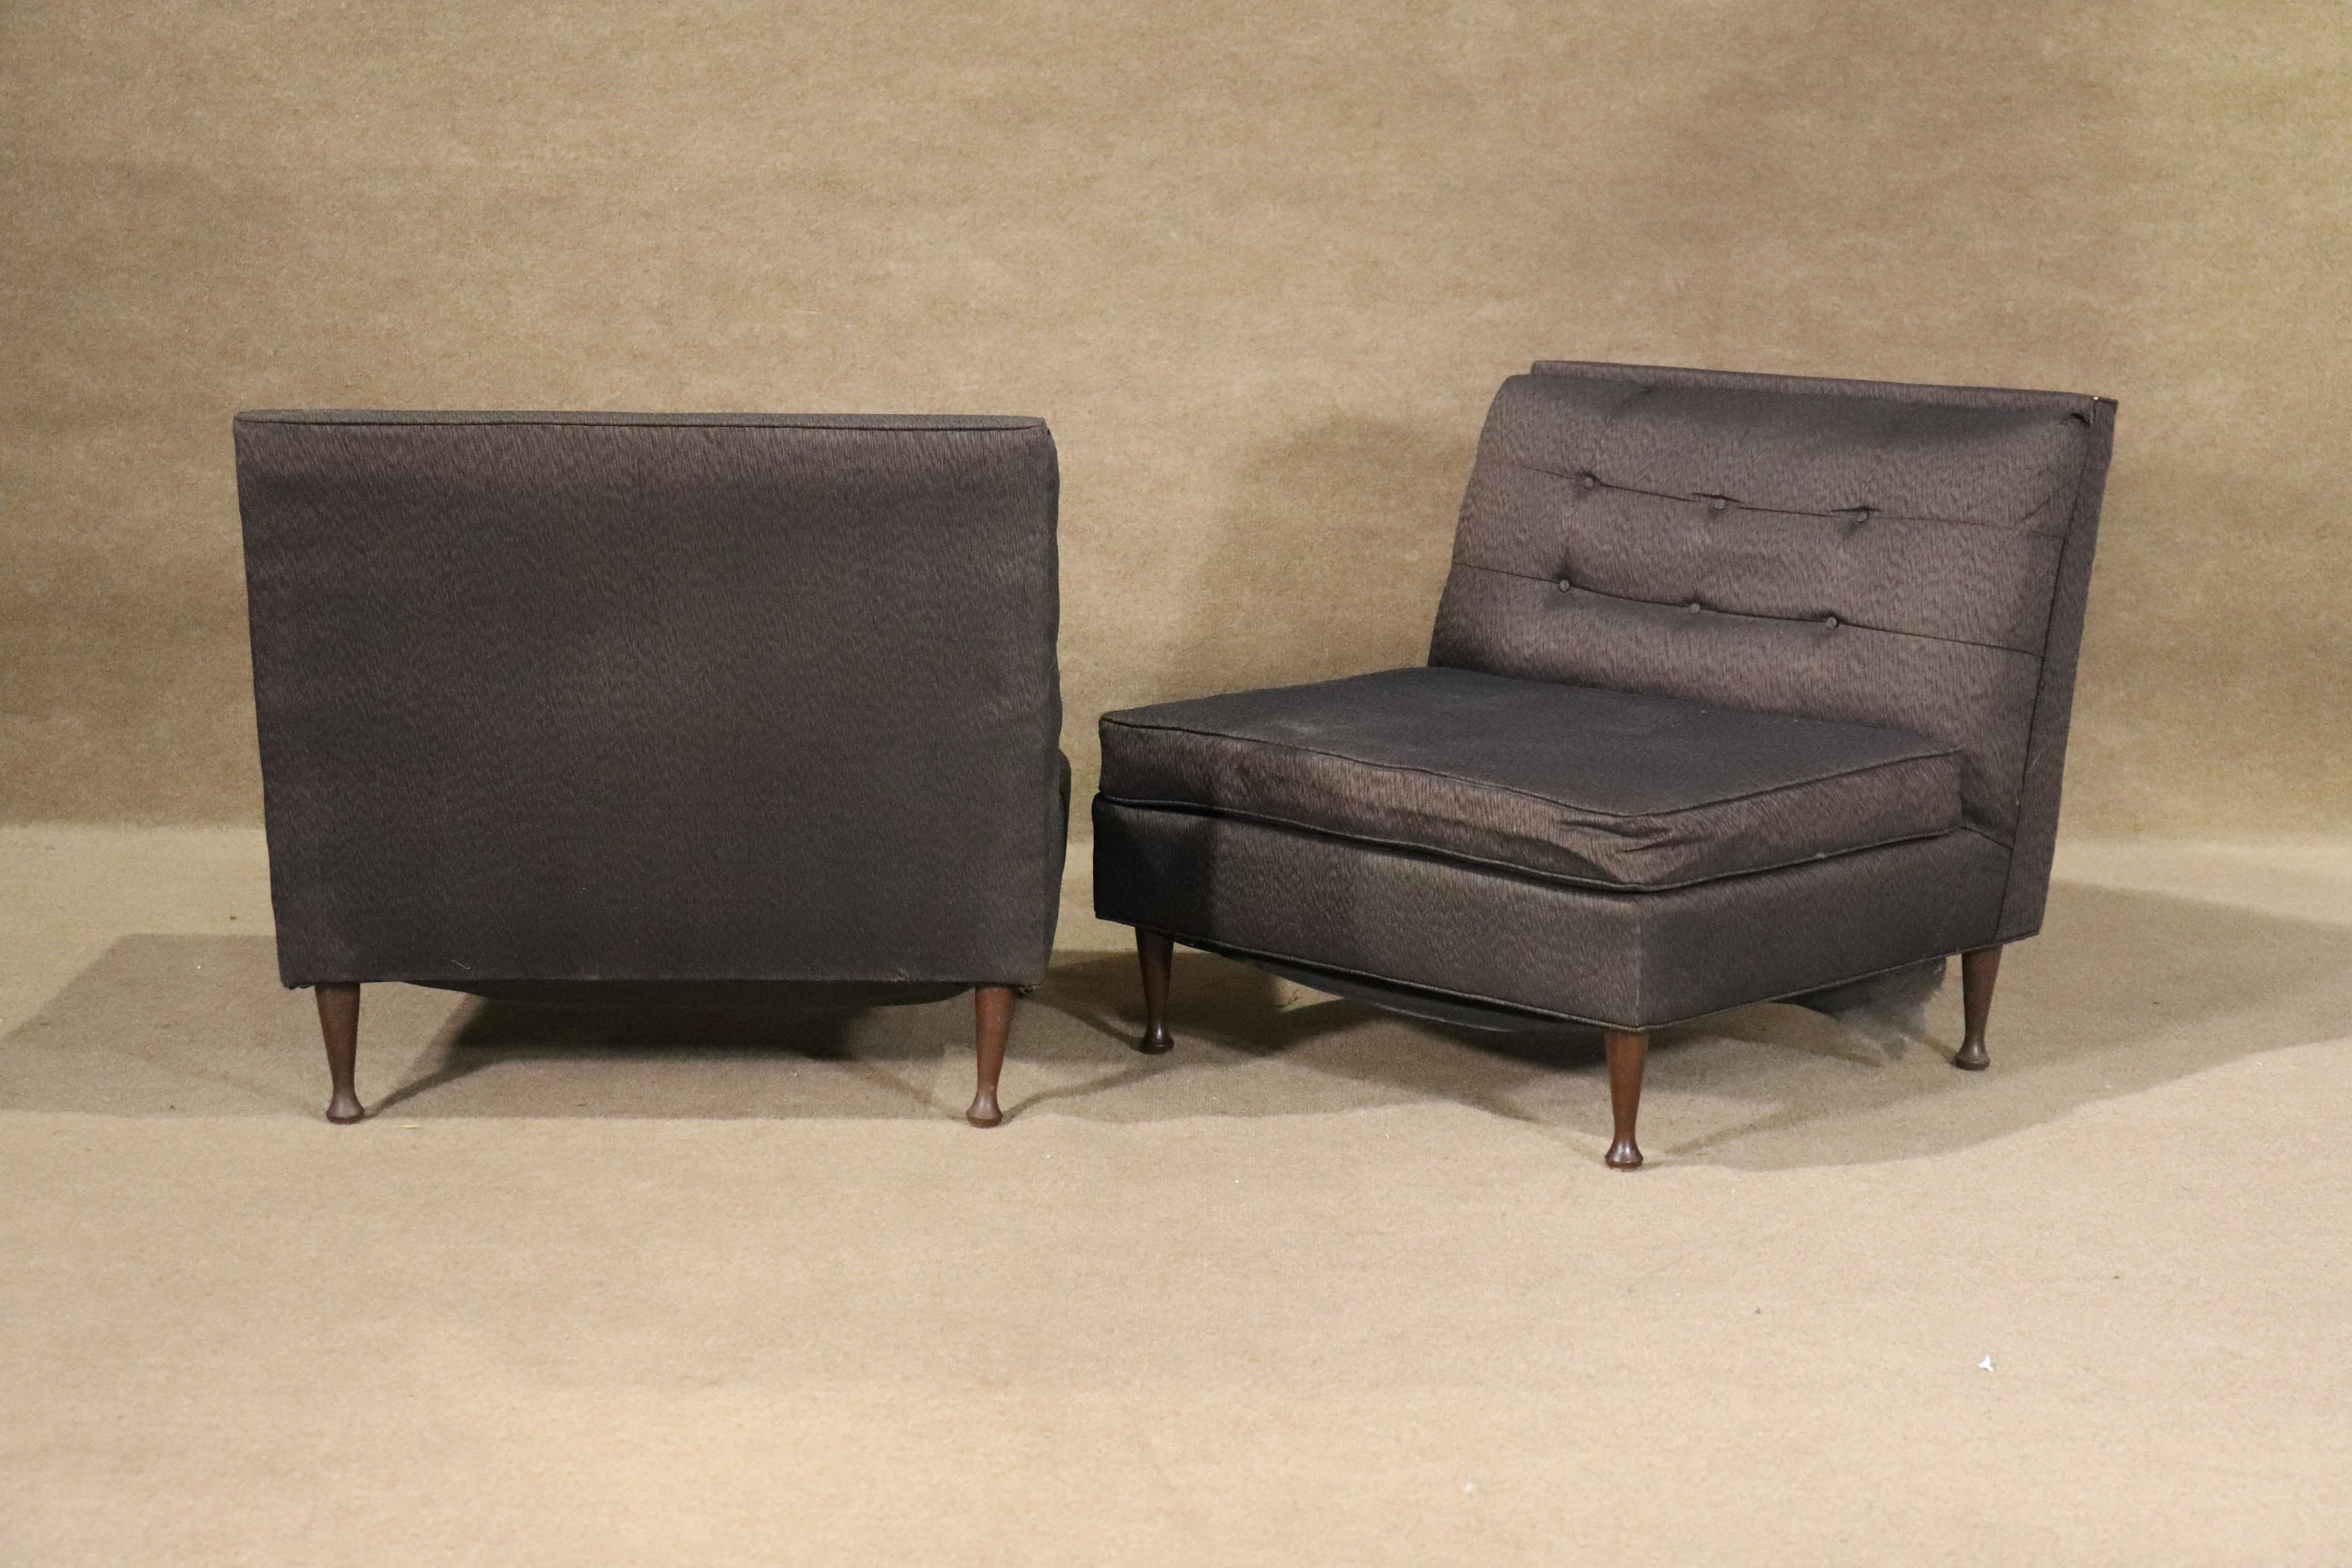 Pair of mid-century modern low profile slipper chairs. Tufted backs and short wood legs.
Please confirm location NY or NJ